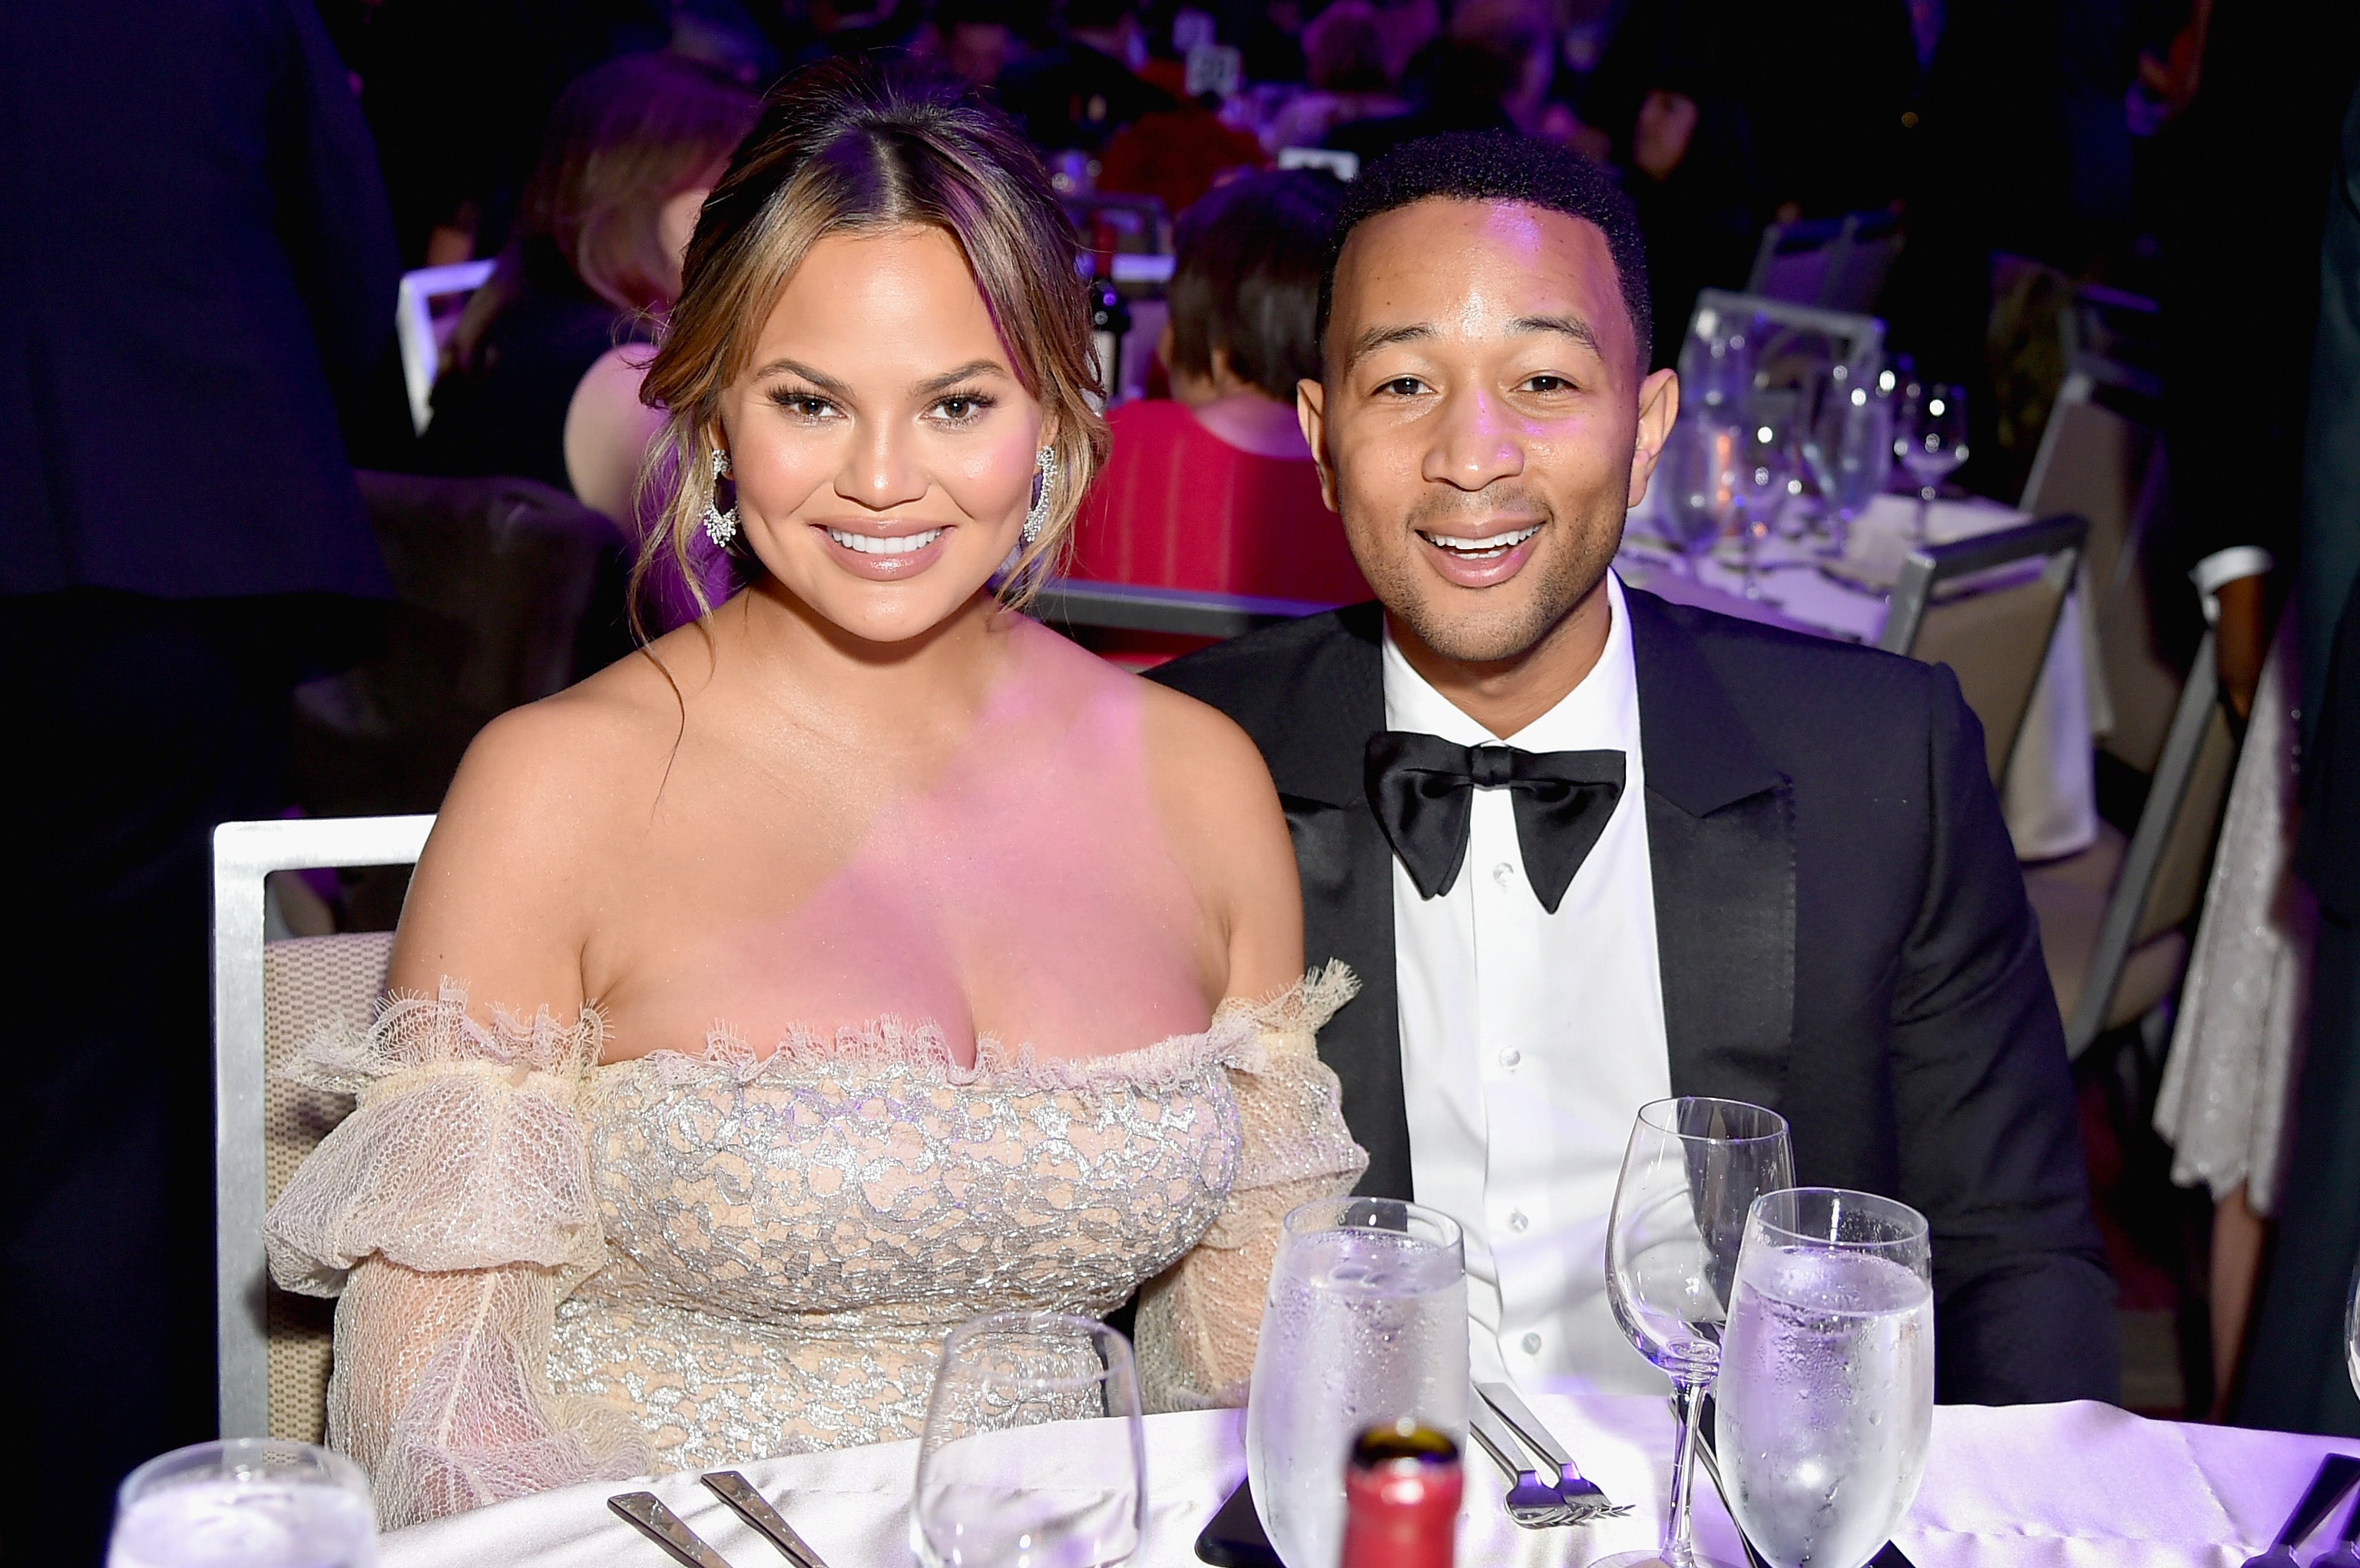 ICYMI: John Legend And Chrissy Teigen Donated $72K To Help ACLU Fight GOP Immigration Policies On Trump's Birthday
